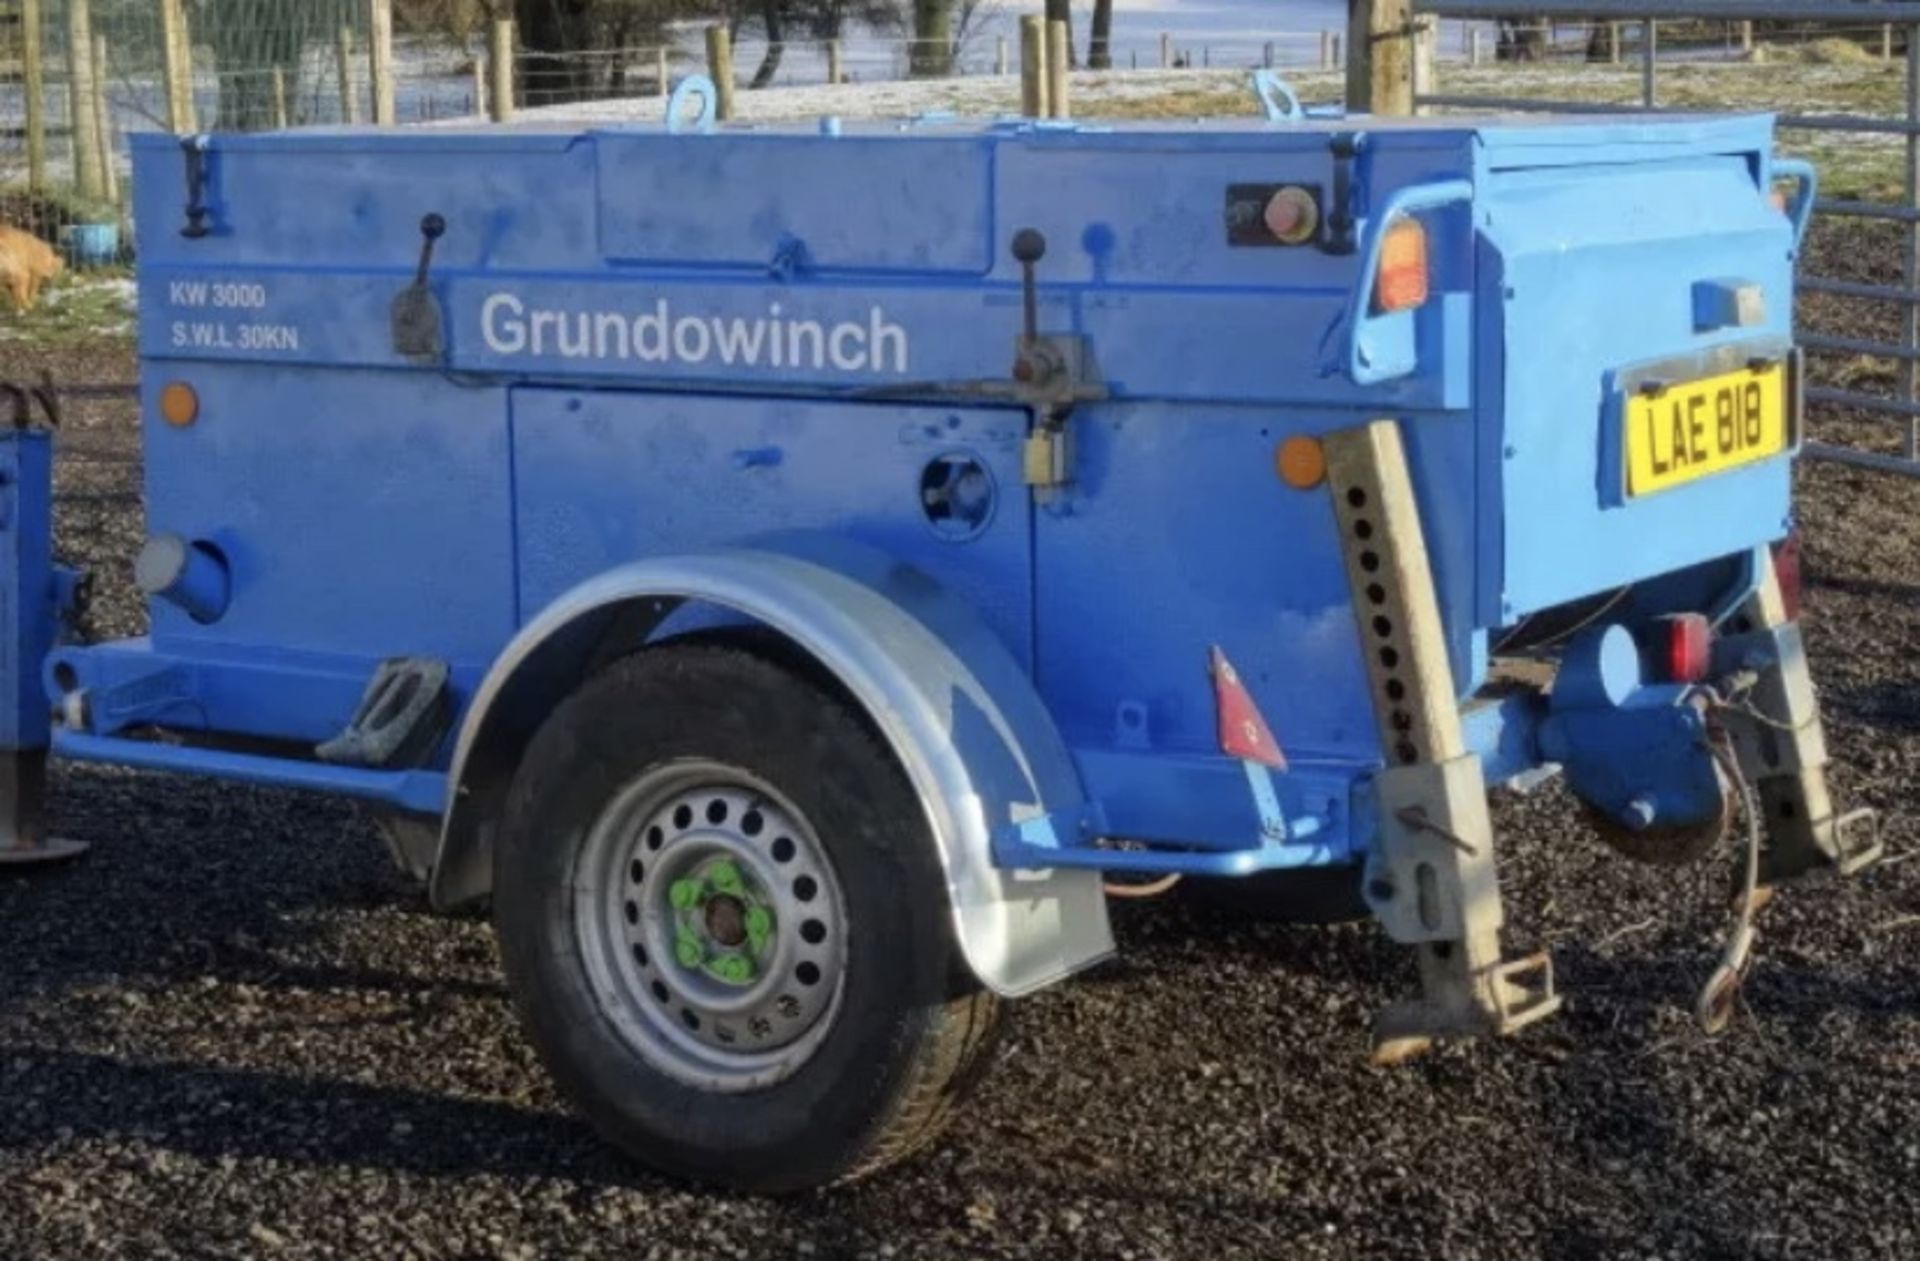 GRUNDOWINCH KW3000 BAGELA TRAILER MOUNTED DIESEL ENGINED 3 TONNE RATED CABLE WINCH UNIT. YEAR 2005